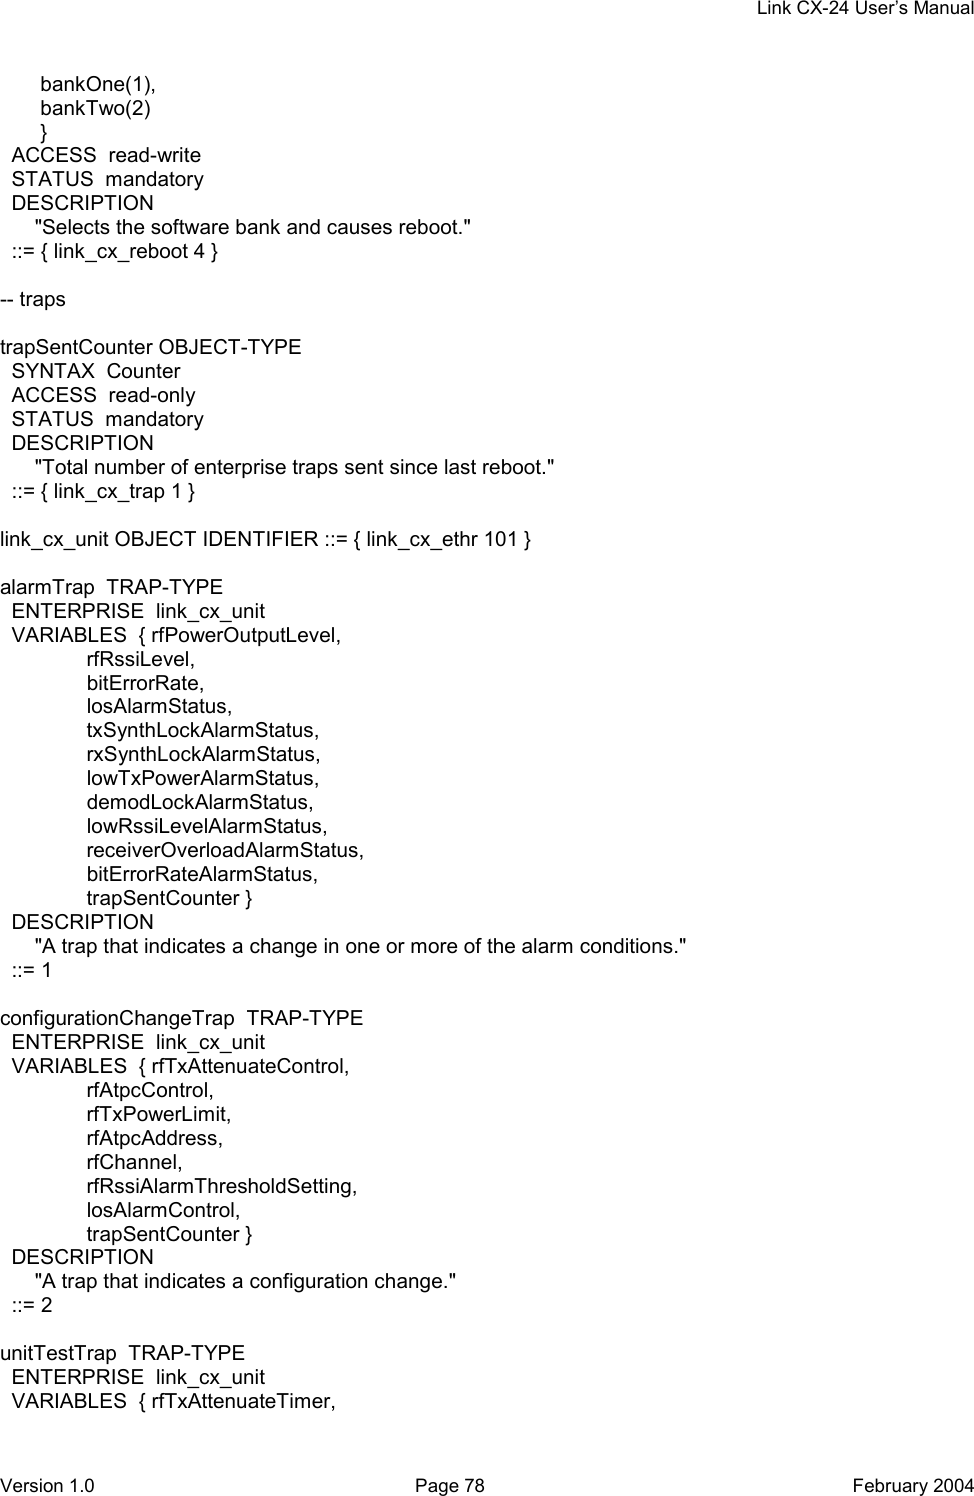     Link CX-24 User’s Manual Version 1.0  Page 78  February 2004        bankOne(1),        bankTwo(2)        }   ACCESS  read-write   STATUS  mandatory   DESCRIPTION       &quot;Selects the software bank and causes reboot.&quot;   ::= { link_cx_reboot 4 }  -- traps  trapSentCounter OBJECT-TYPE   SYNTAX  Counter   ACCESS  read-only   STATUS  mandatory   DESCRIPTION       &quot;Total number of enterprise traps sent since last reboot.&quot;   ::= { link_cx_trap 1 }  link_cx_unit OBJECT IDENTIFIER ::= { link_cx_ethr 101 }  alarmTrap  TRAP-TYPE   ENTERPRISE  link_cx_unit   VARIABLES  { rfPowerOutputLevel,                rfRssiLevel,                bitErrorRate,                losAlarmStatus,                txSynthLockAlarmStatus,                rxSynthLockAlarmStatus,                lowTxPowerAlarmStatus,                demodLockAlarmStatus,                lowRssiLevelAlarmStatus,                receiverOverloadAlarmStatus,                bitErrorRateAlarmStatus,                trapSentCounter }   DESCRIPTION       &quot;A trap that indicates a change in one or more of the alarm conditions.&quot;   ::= 1  configurationChangeTrap  TRAP-TYPE   ENTERPRISE  link_cx_unit   VARIABLES  { rfTxAttenuateControl,                 rfAtpcControl,                rfTxPowerLimit,                rfAtpcAddress,                rfChannel,                rfRssiAlarmThresholdSetting,                losAlarmControl,                trapSentCounter }   DESCRIPTION       &quot;A trap that indicates a configuration change.&quot;   ::= 2  unitTestTrap  TRAP-TYPE   ENTERPRISE  link_cx_unit   VARIABLES  { rfTxAttenuateTimer, 